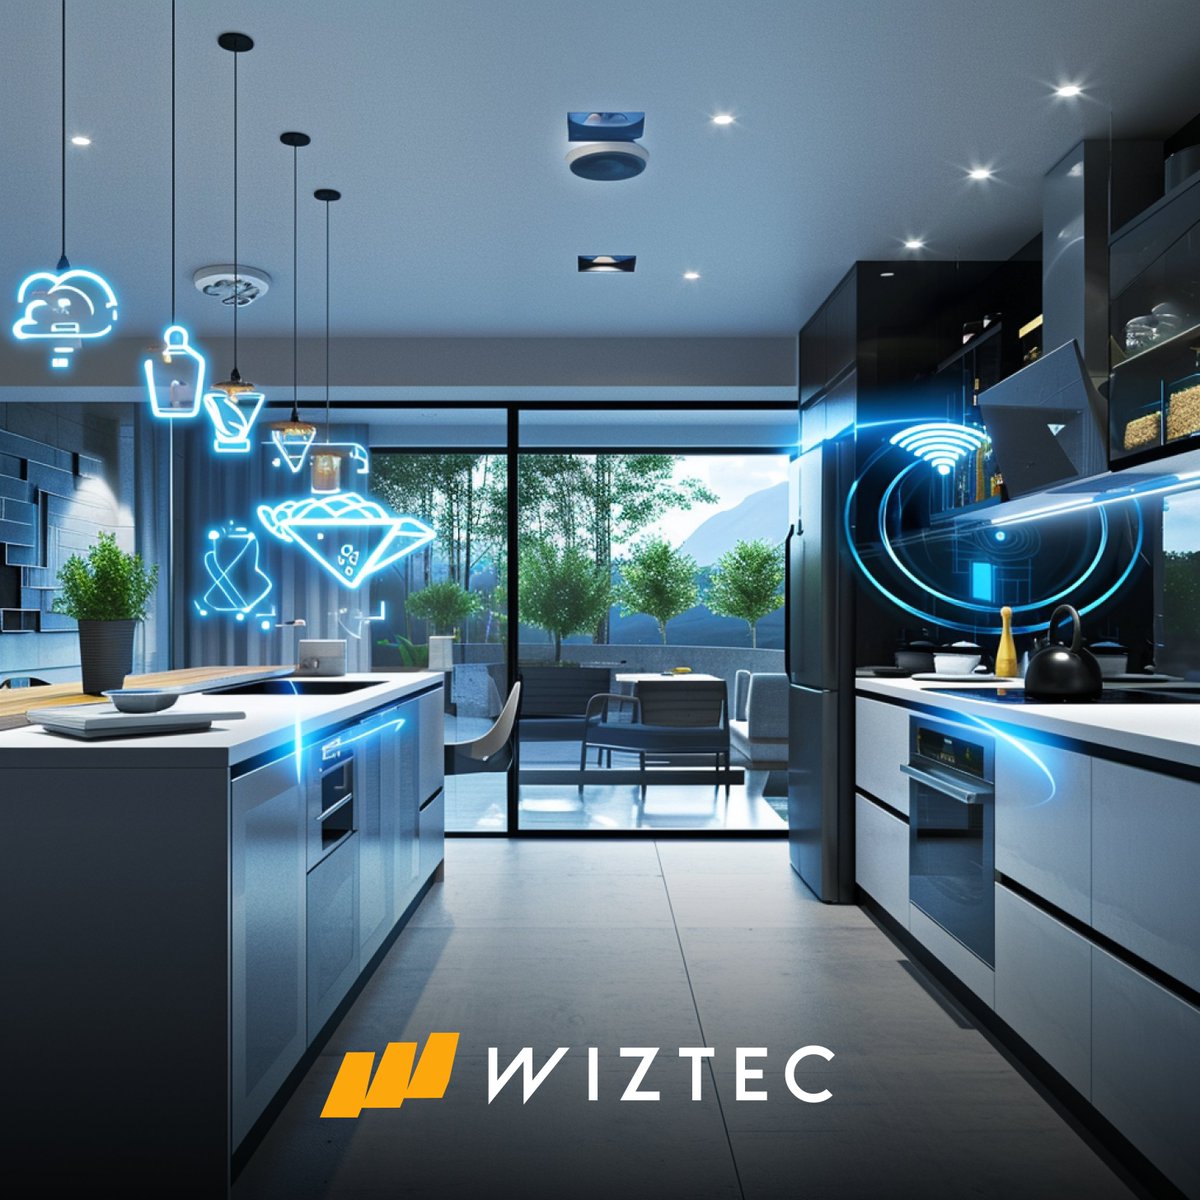 Smart Home from Wiztec. Meet the brains behind your smart home setup! Our team ensures seamless integration for a smarter living. #TeamSpotlight #SmartExperts #SmartHome #Wiztec